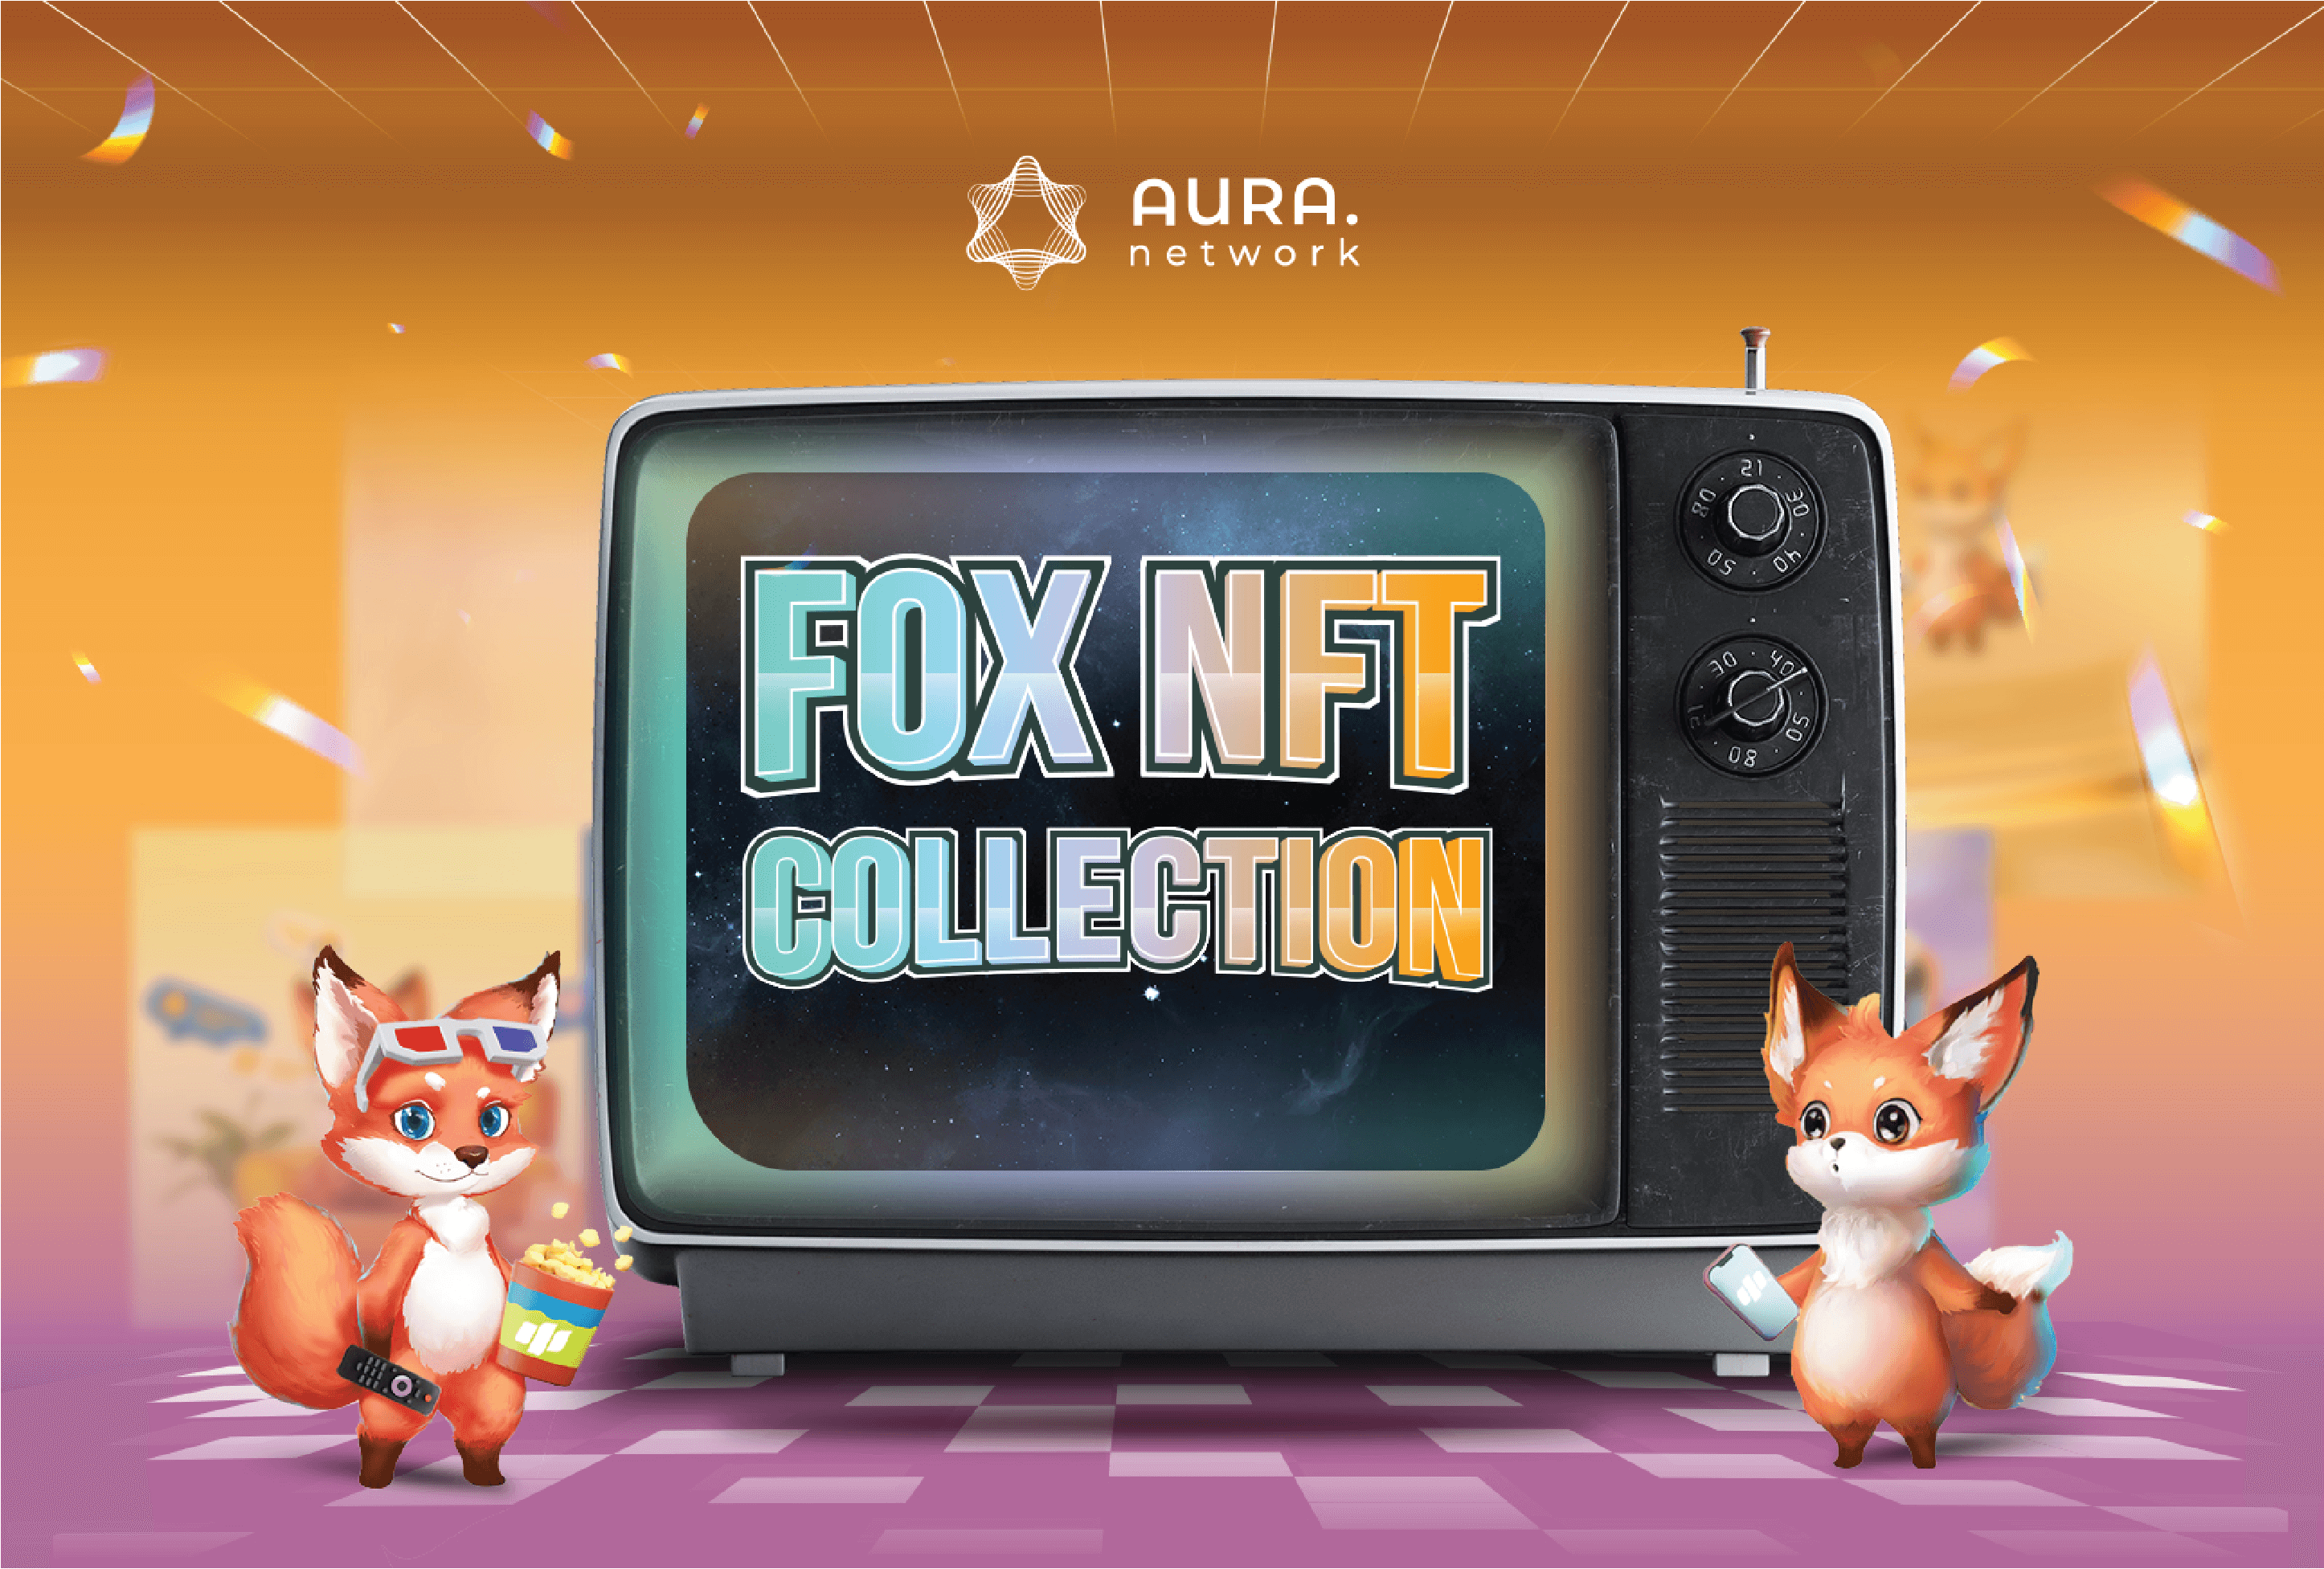 FOX NFT Release in Collaboration of Aura Network and A Leading TV Streaming App